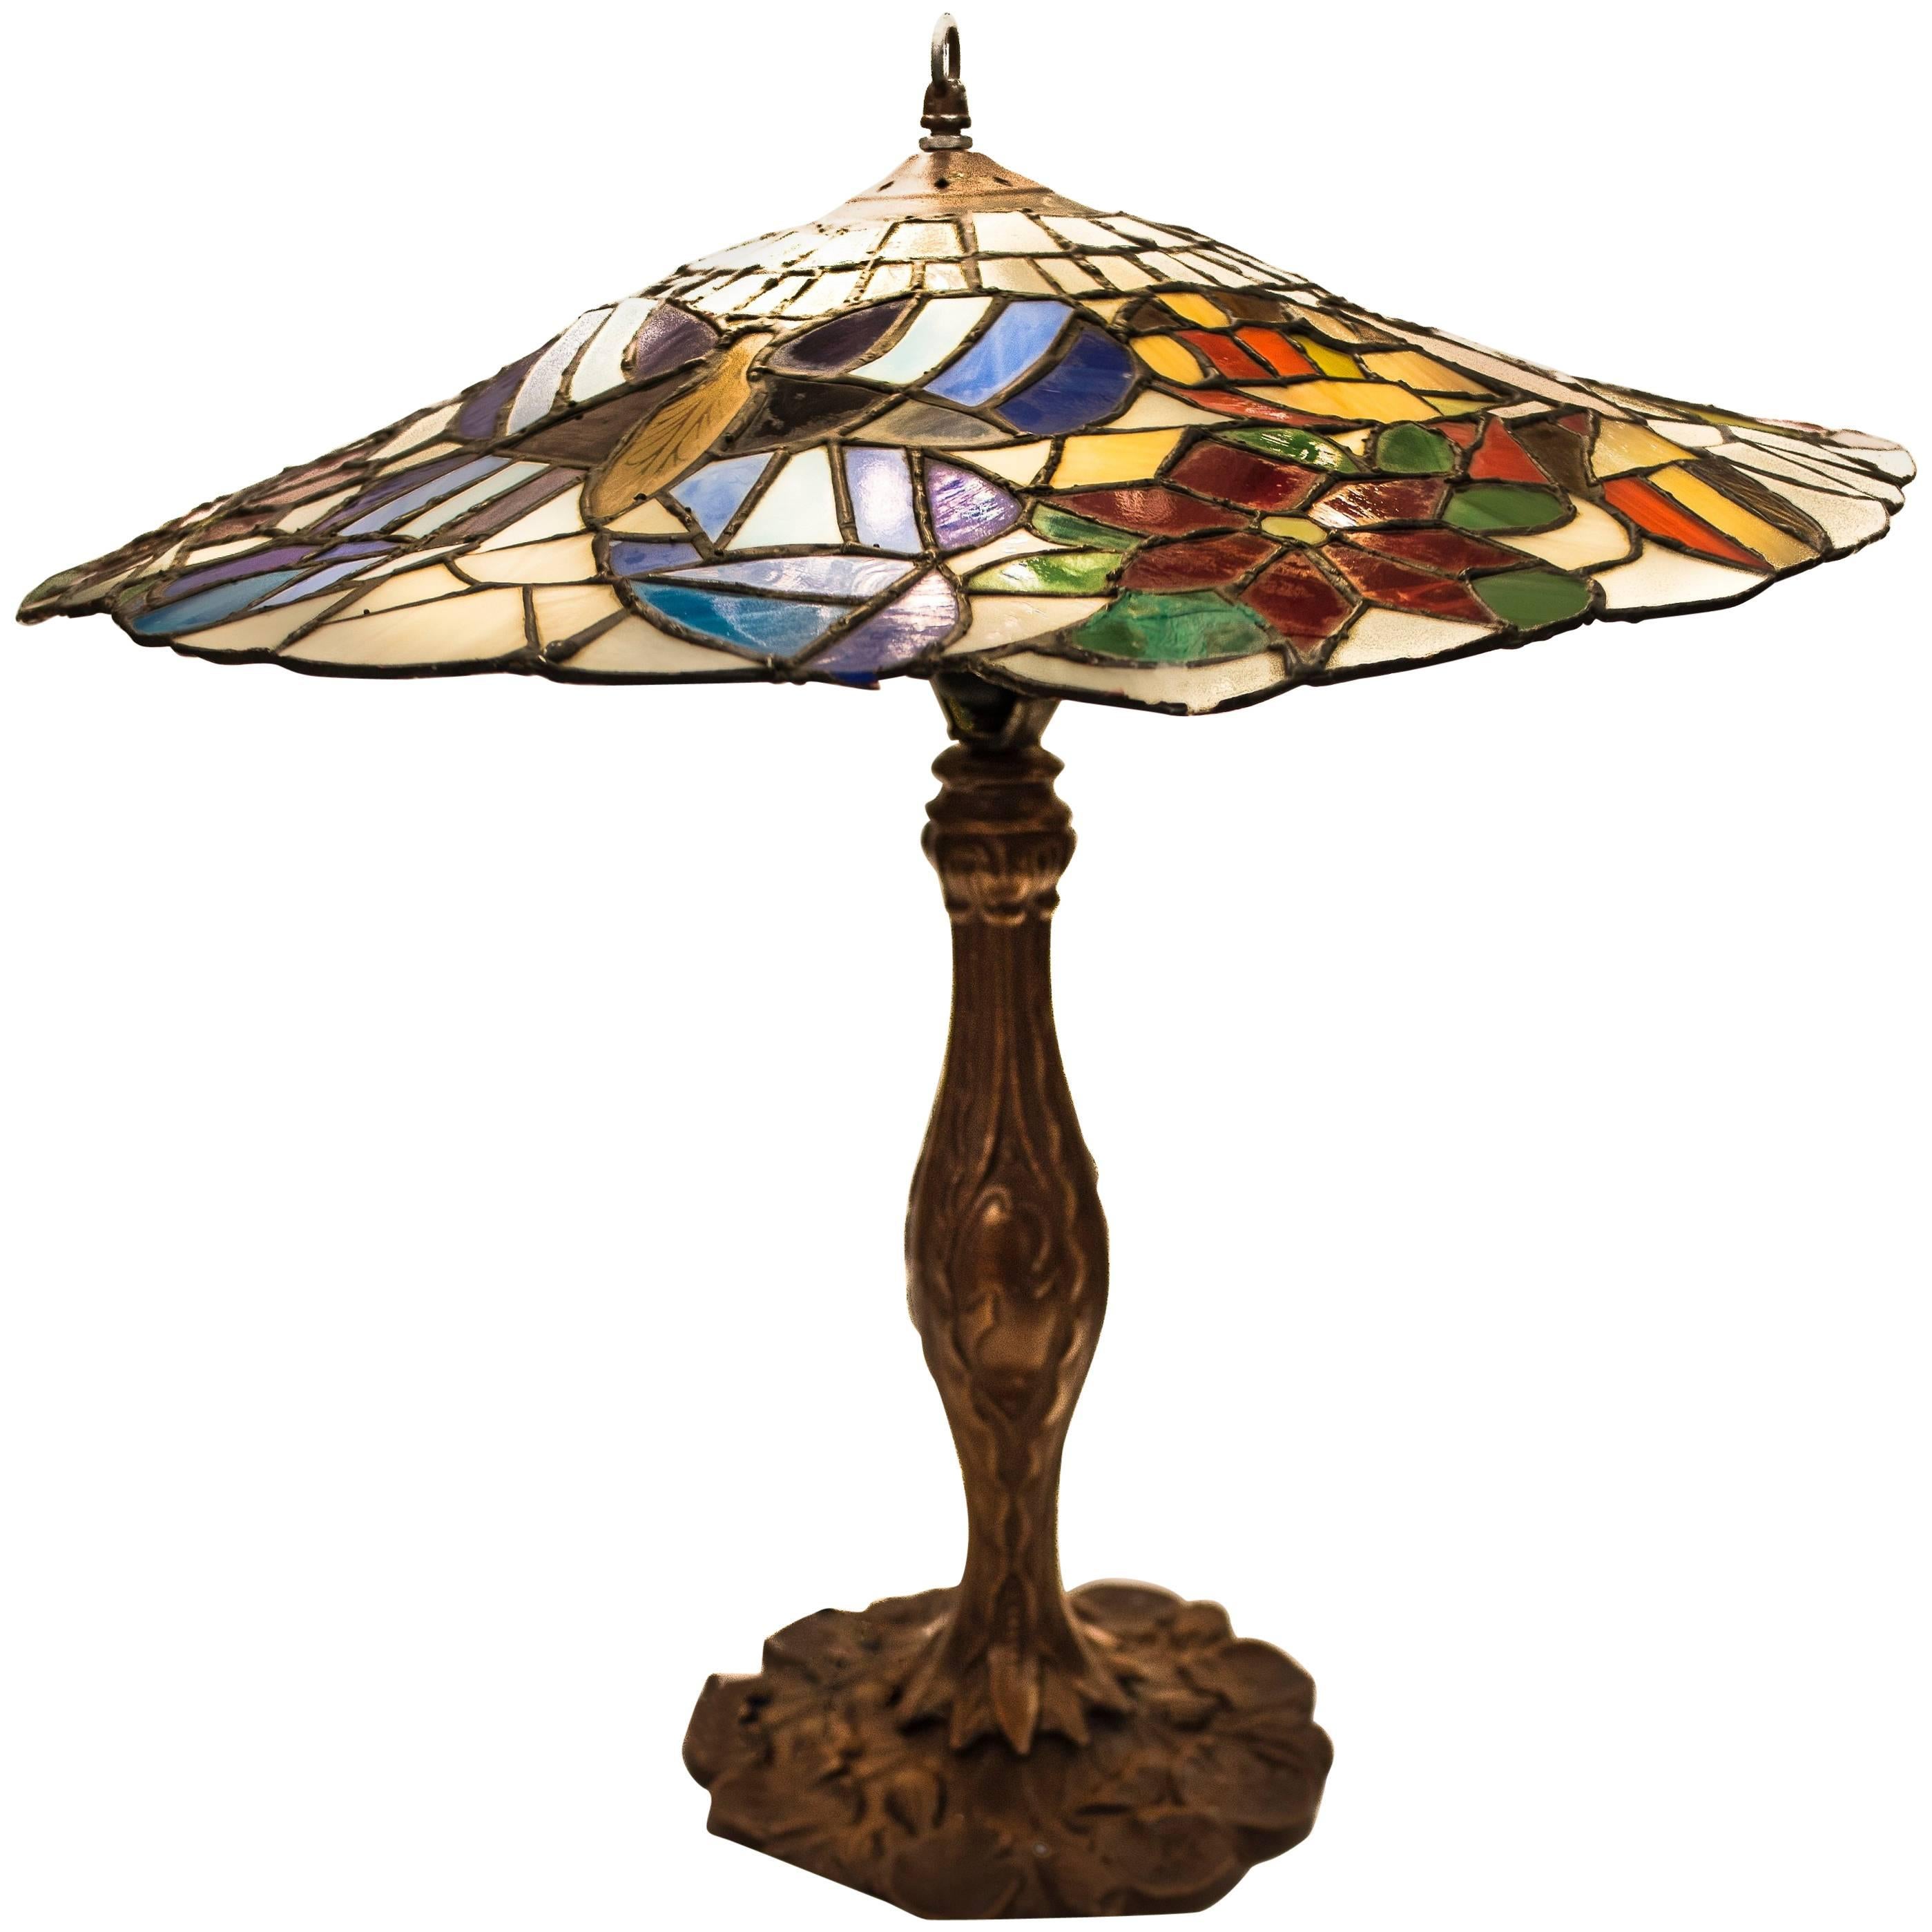 Tiffany Style circa 1900 Table Lamp in Polychromed Leaded Glass and Bronze